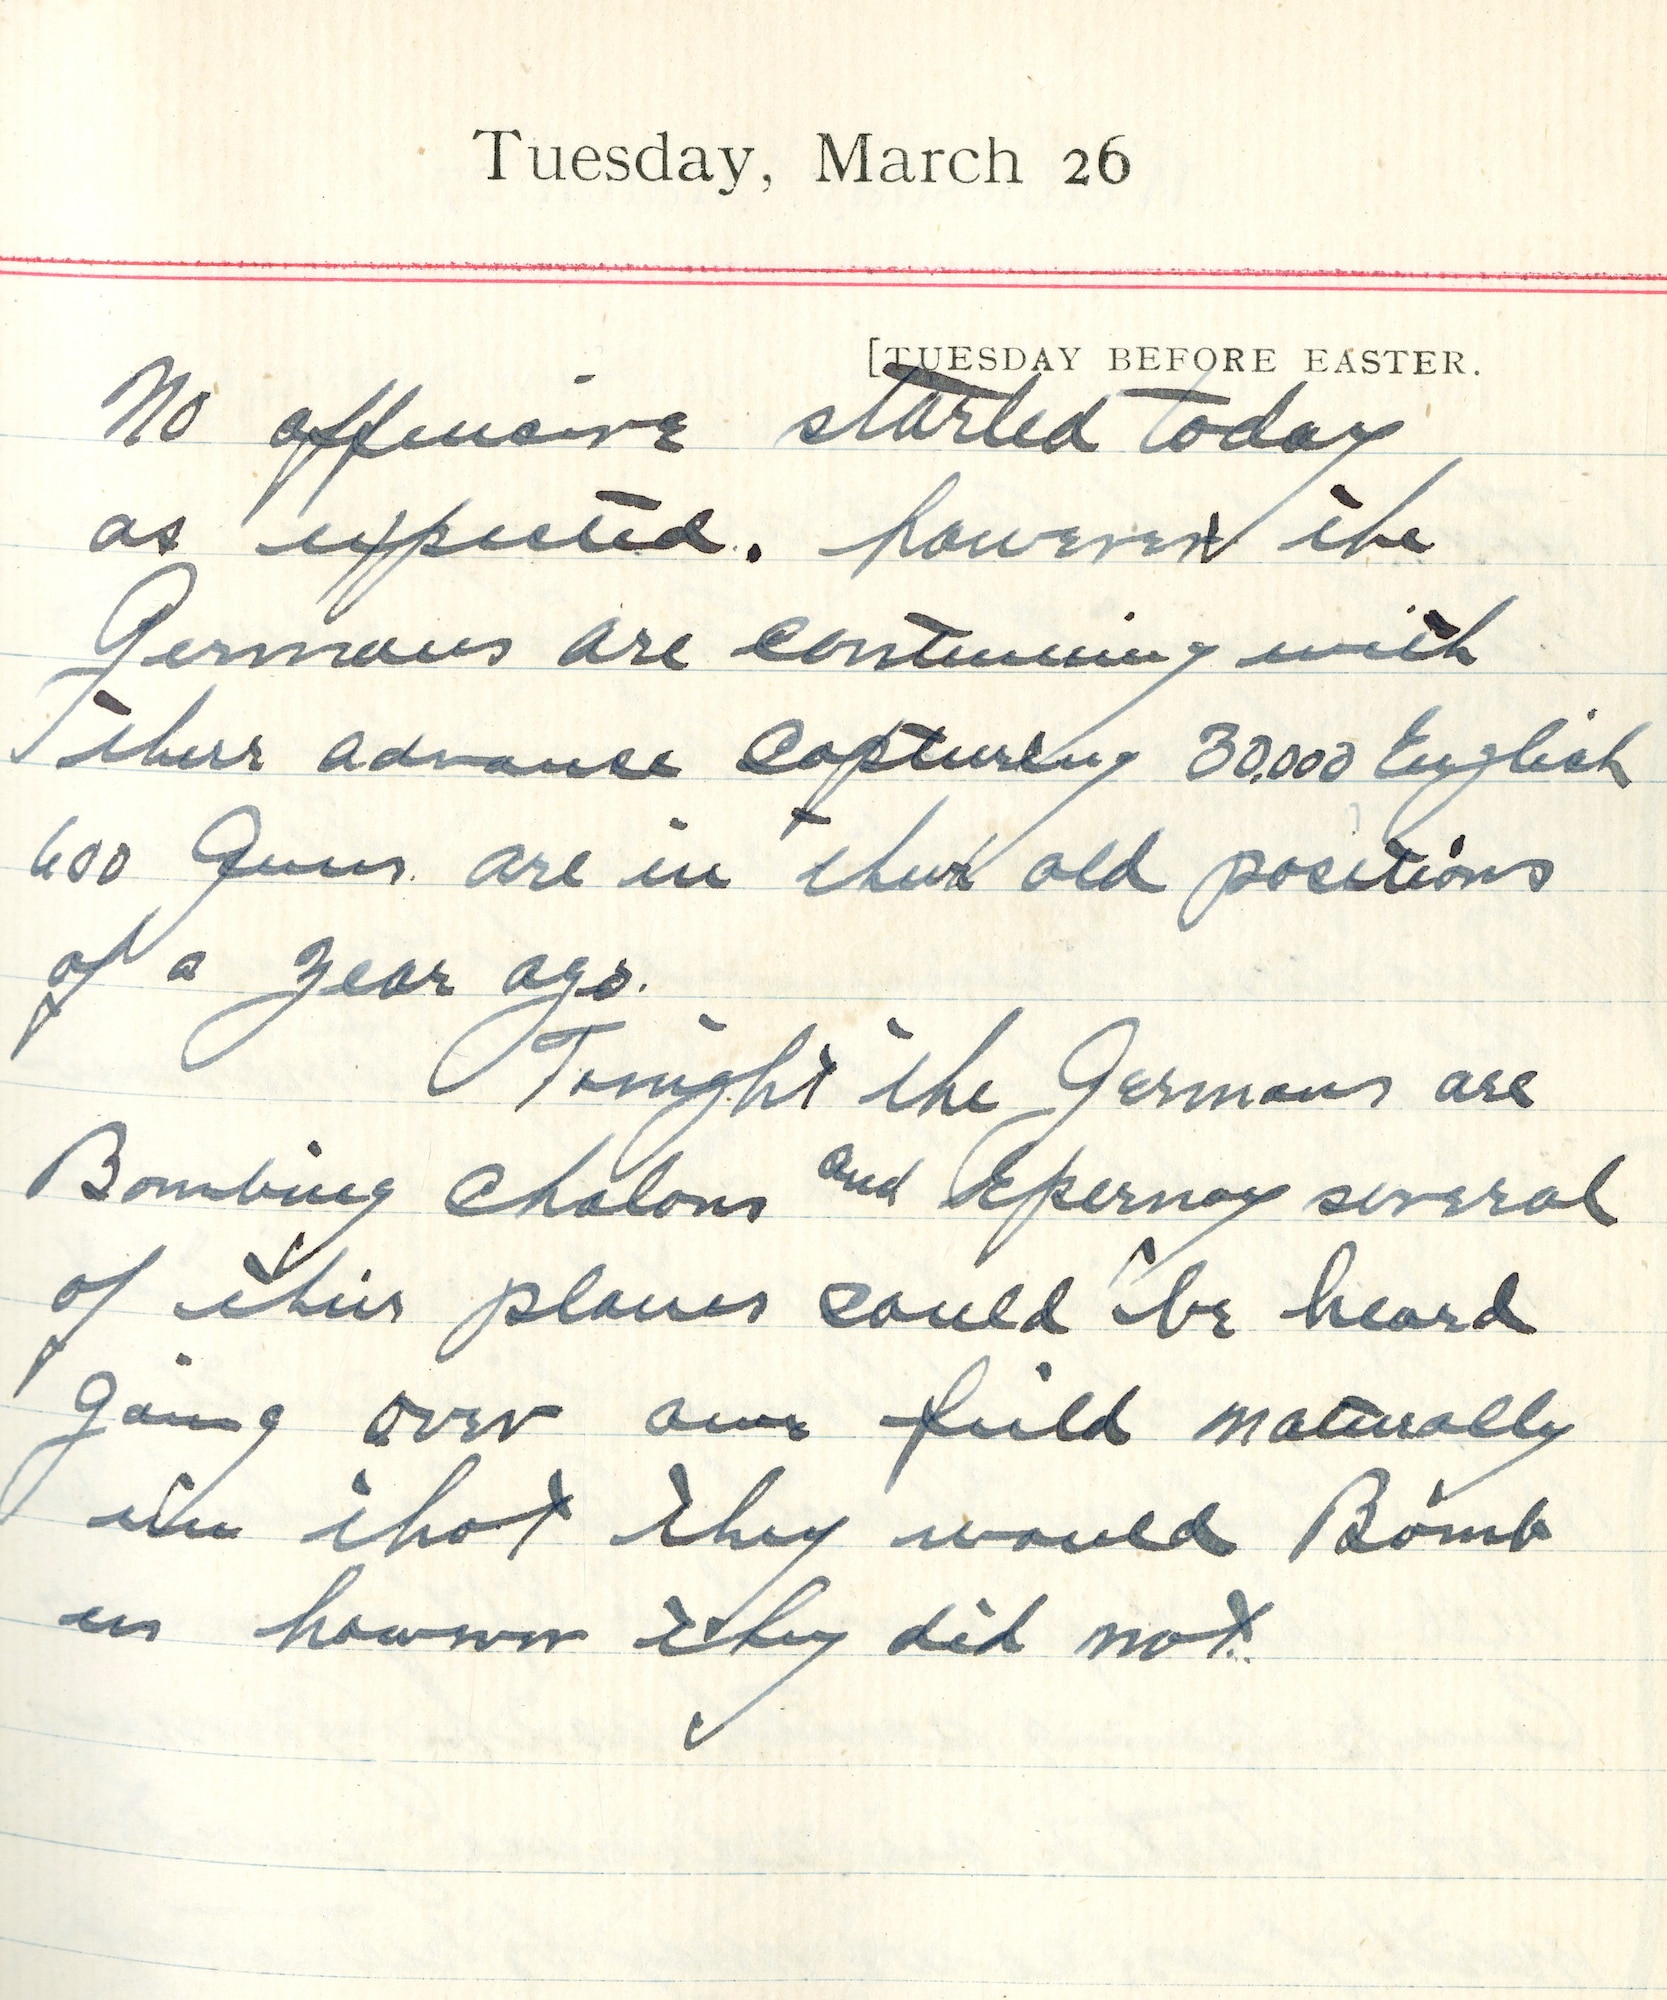 Capt. Edward V. Rickenbacker's 1918 wartime diary entry. (03/26/1918).

No offensive started today as expected.  However, the Germans are continuing with their advance capturing 30,000 English, 600 guns.  [They] are in their old positions of a year ago.

Tonight the Germans are bombing Chalons and Epernay.  Several of their planes could be heard going over our field.  Naturally we thought they would bomb us however they did not.